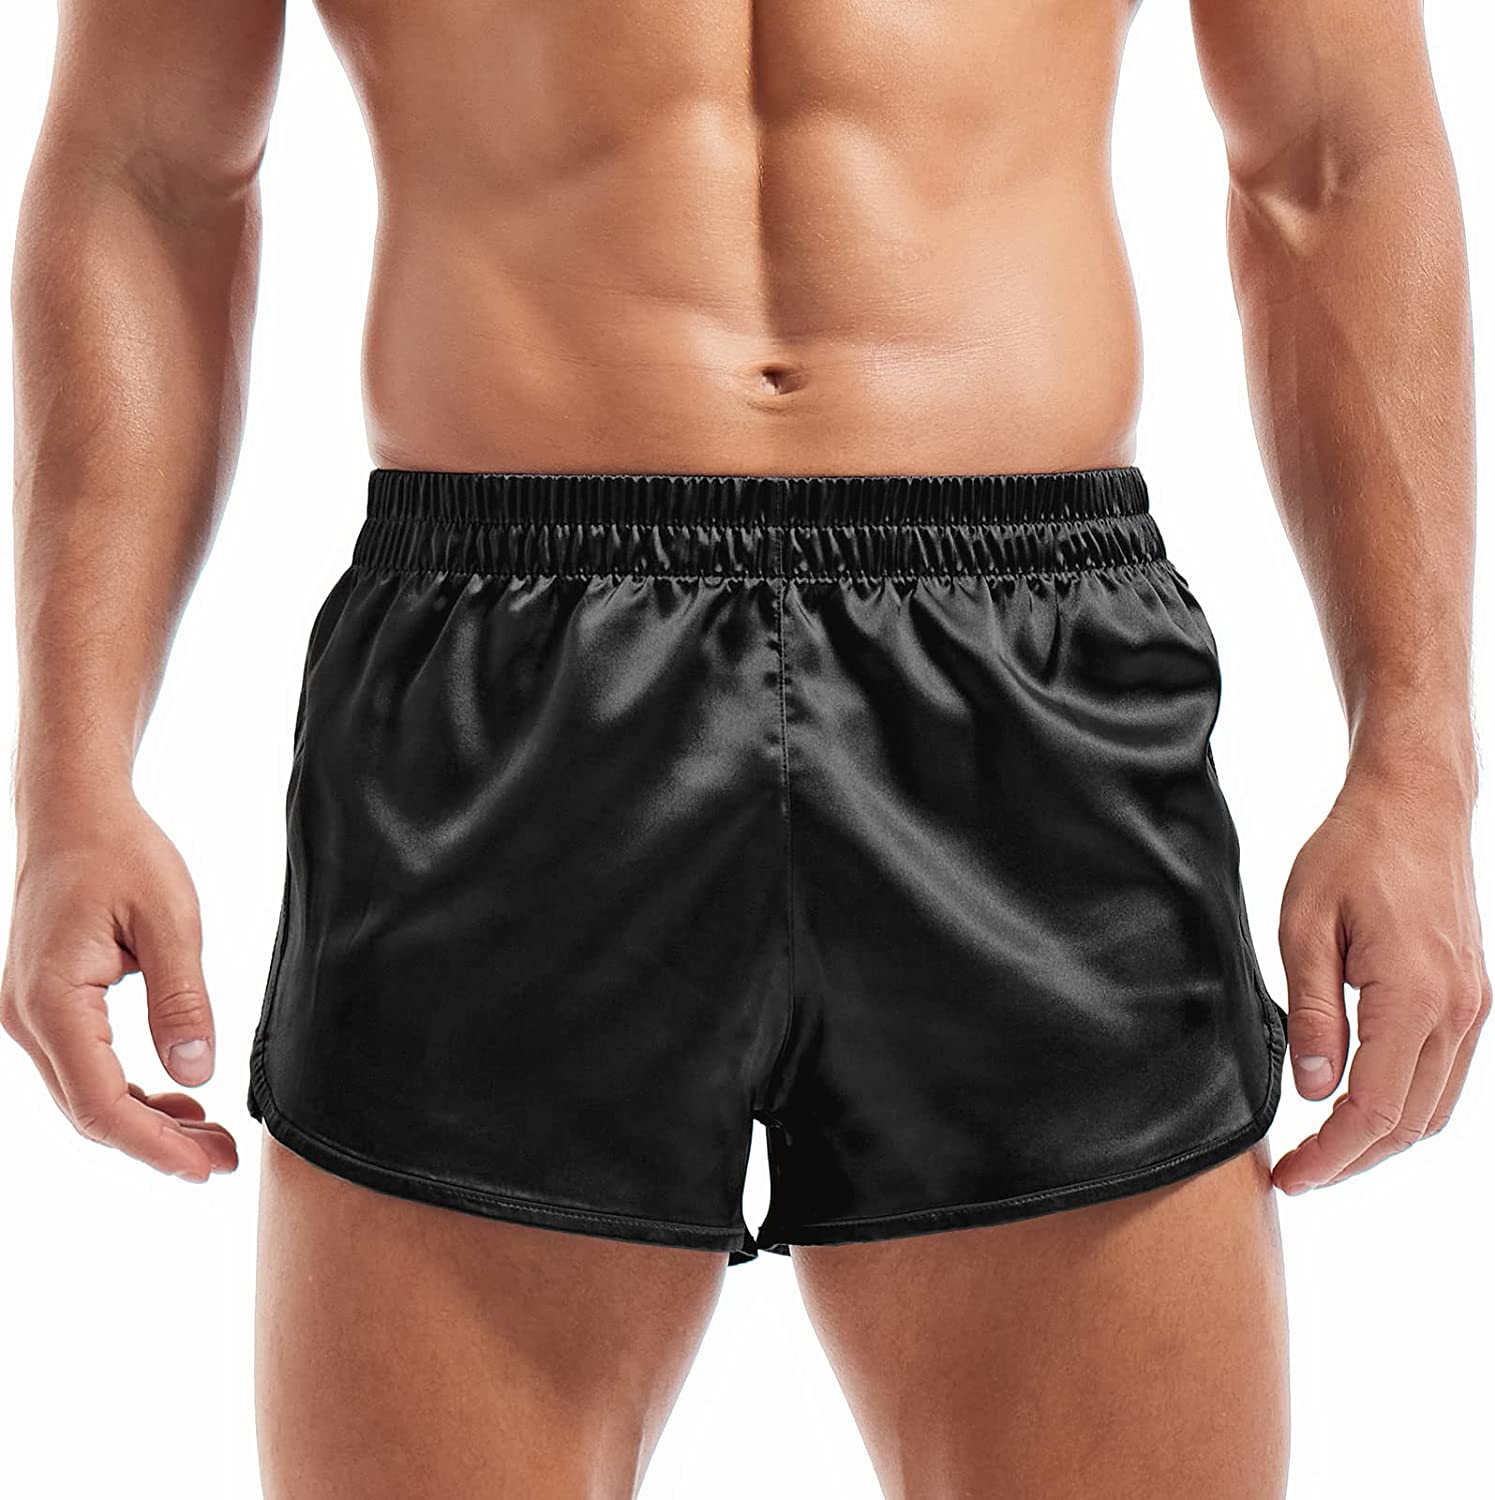 AMY COULEE Mens Satin Shorts Silk Boxers Sexy Split Side Lounge Shorts 3  Inch Pa